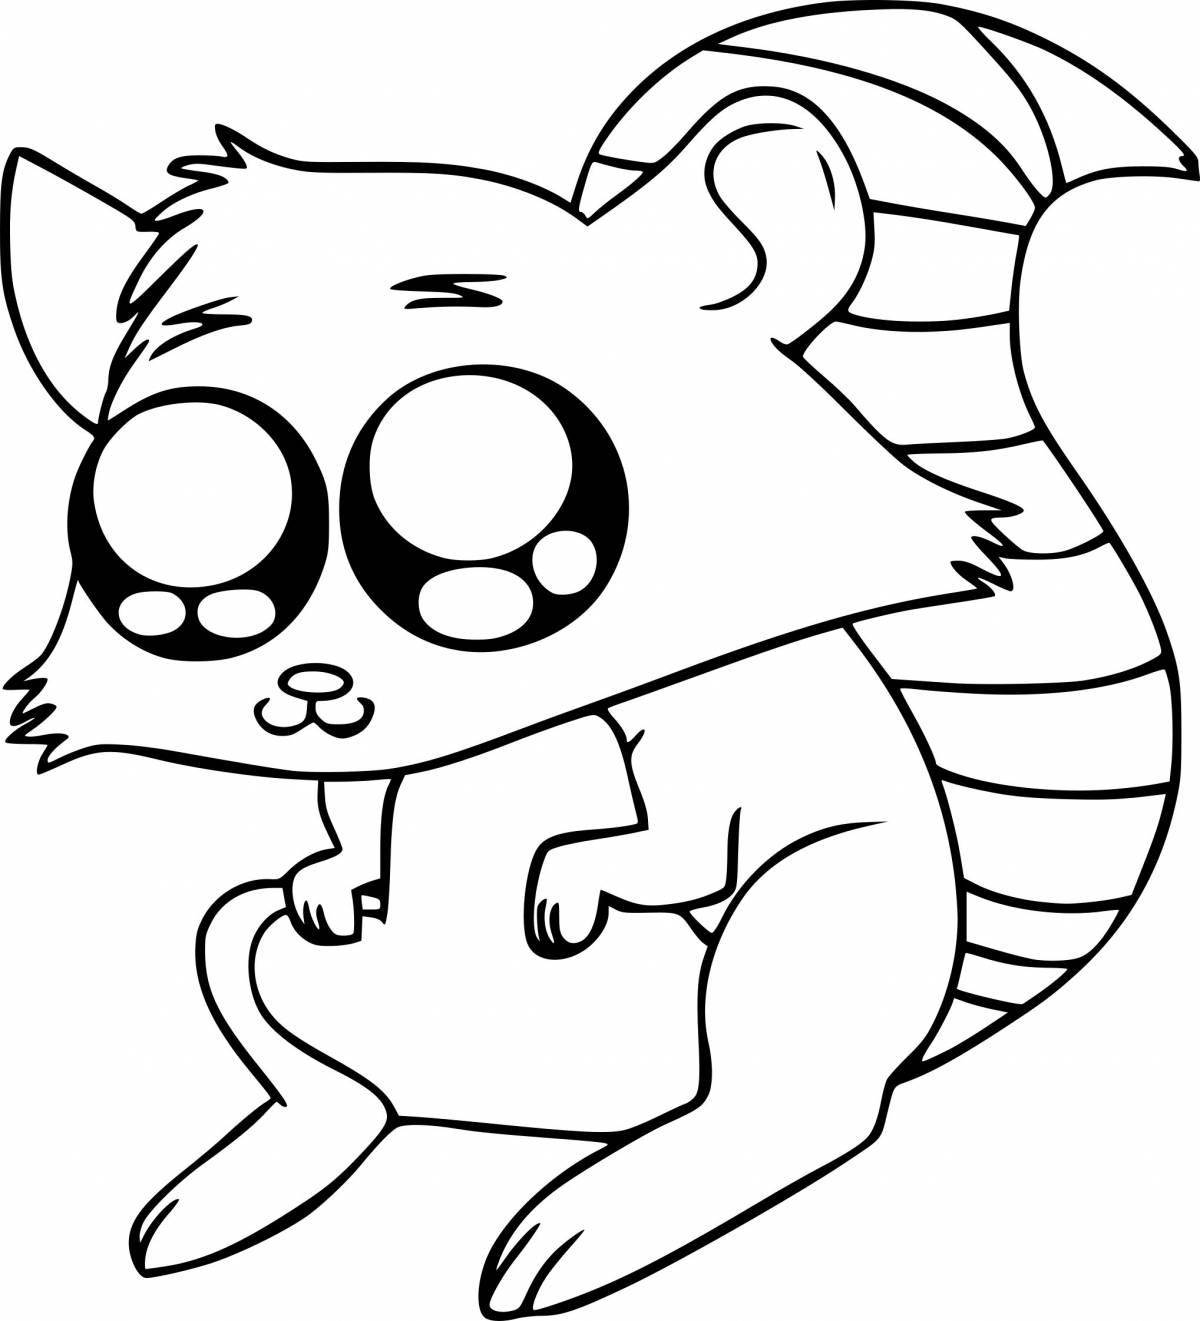 Crazy raccoon coloring page for kids